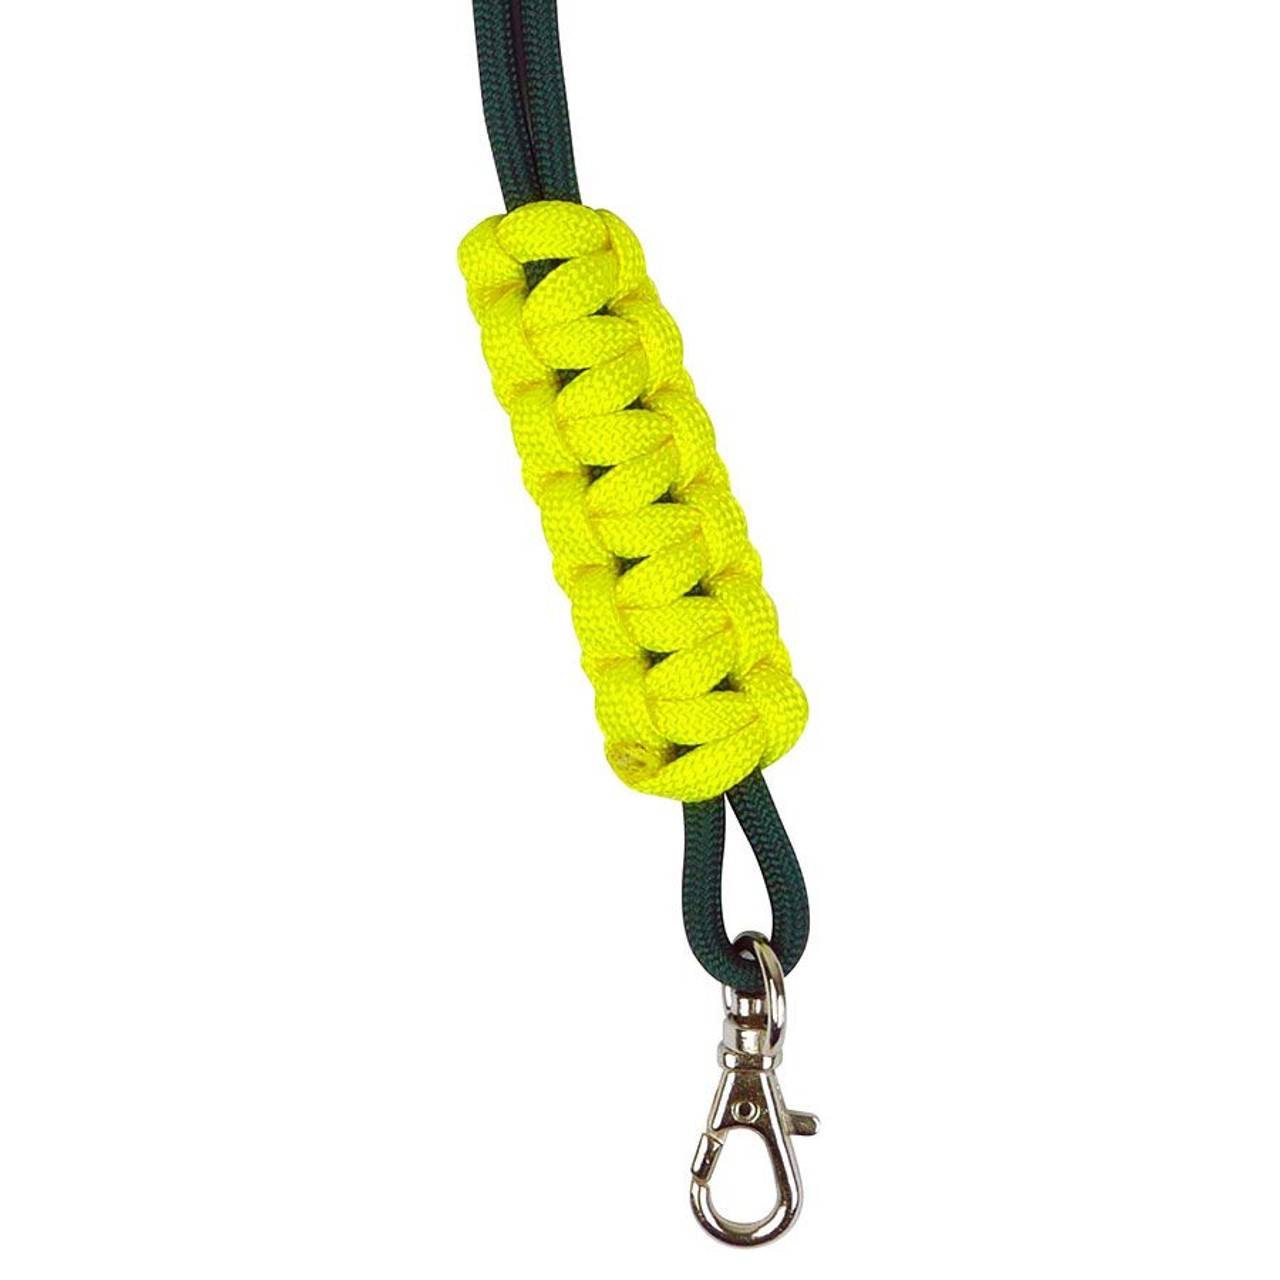 CERT Paracord Lanyard with Swivel Snap Hook Clasp - CERT Kits Supplies